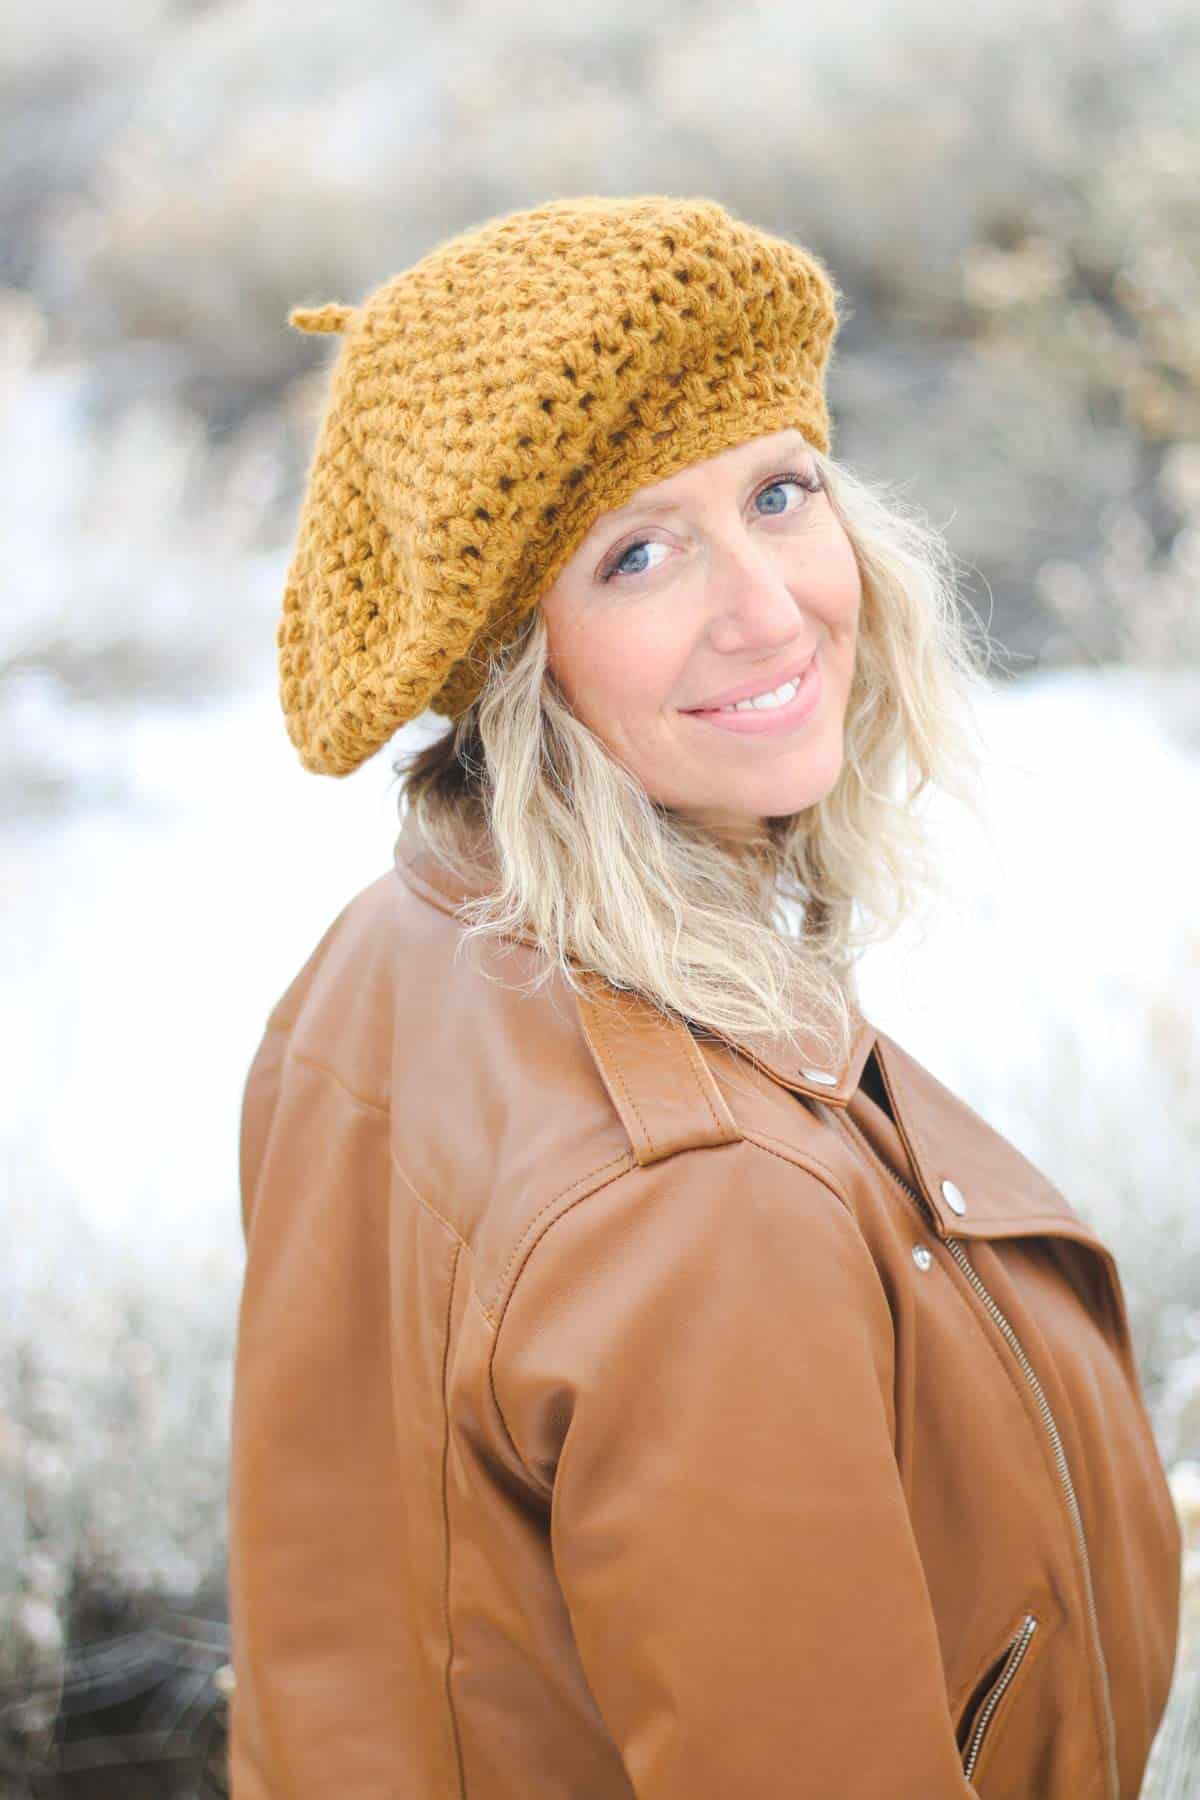 A woman smiling while wearing a slouchy beret hat.